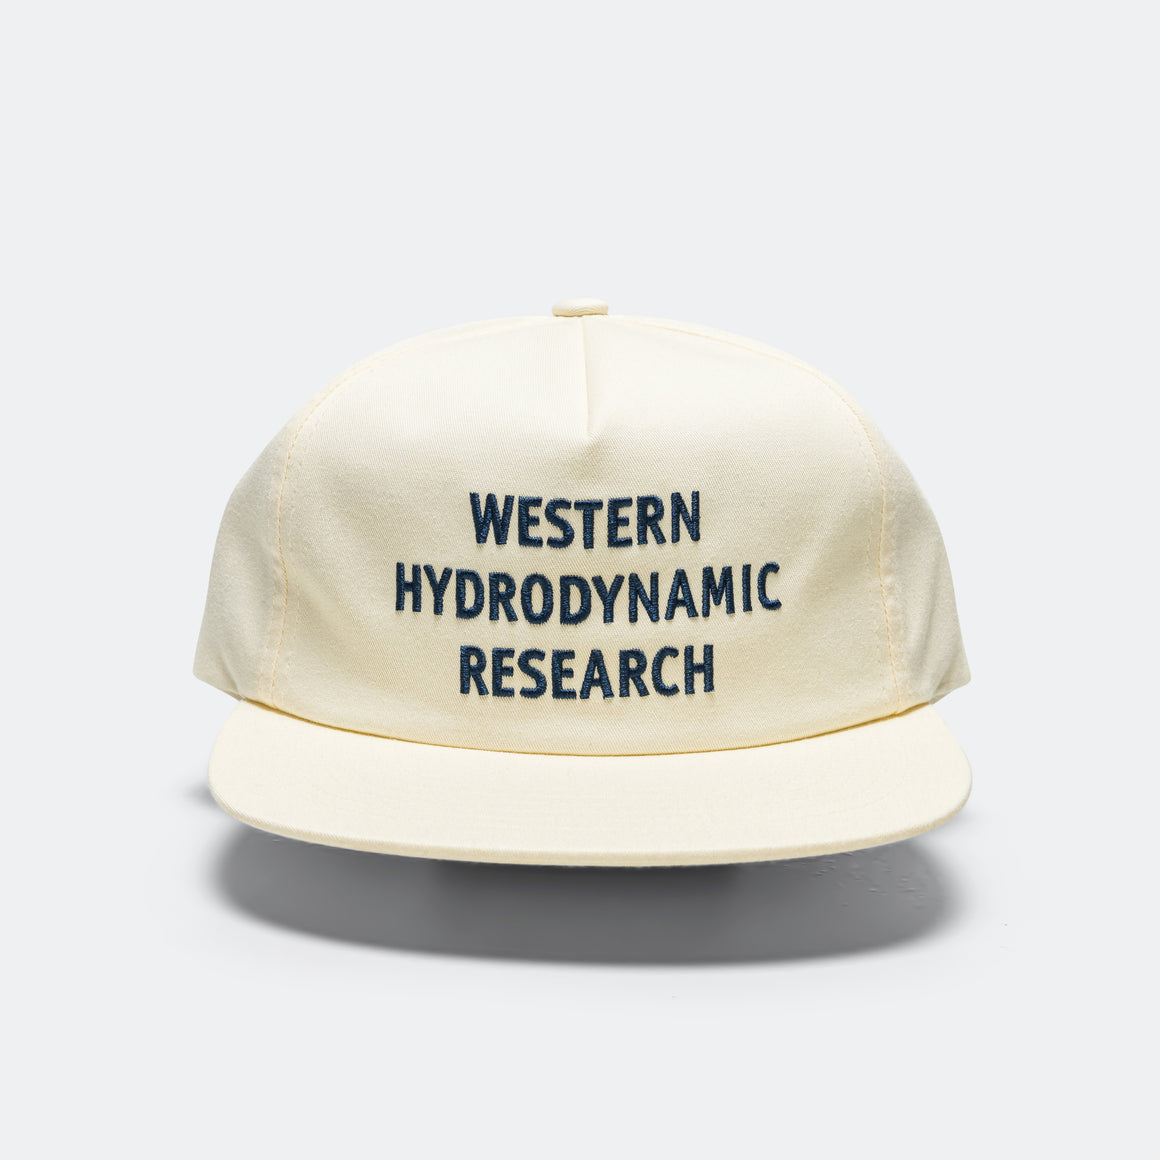 Promotional Hat - White/Navy